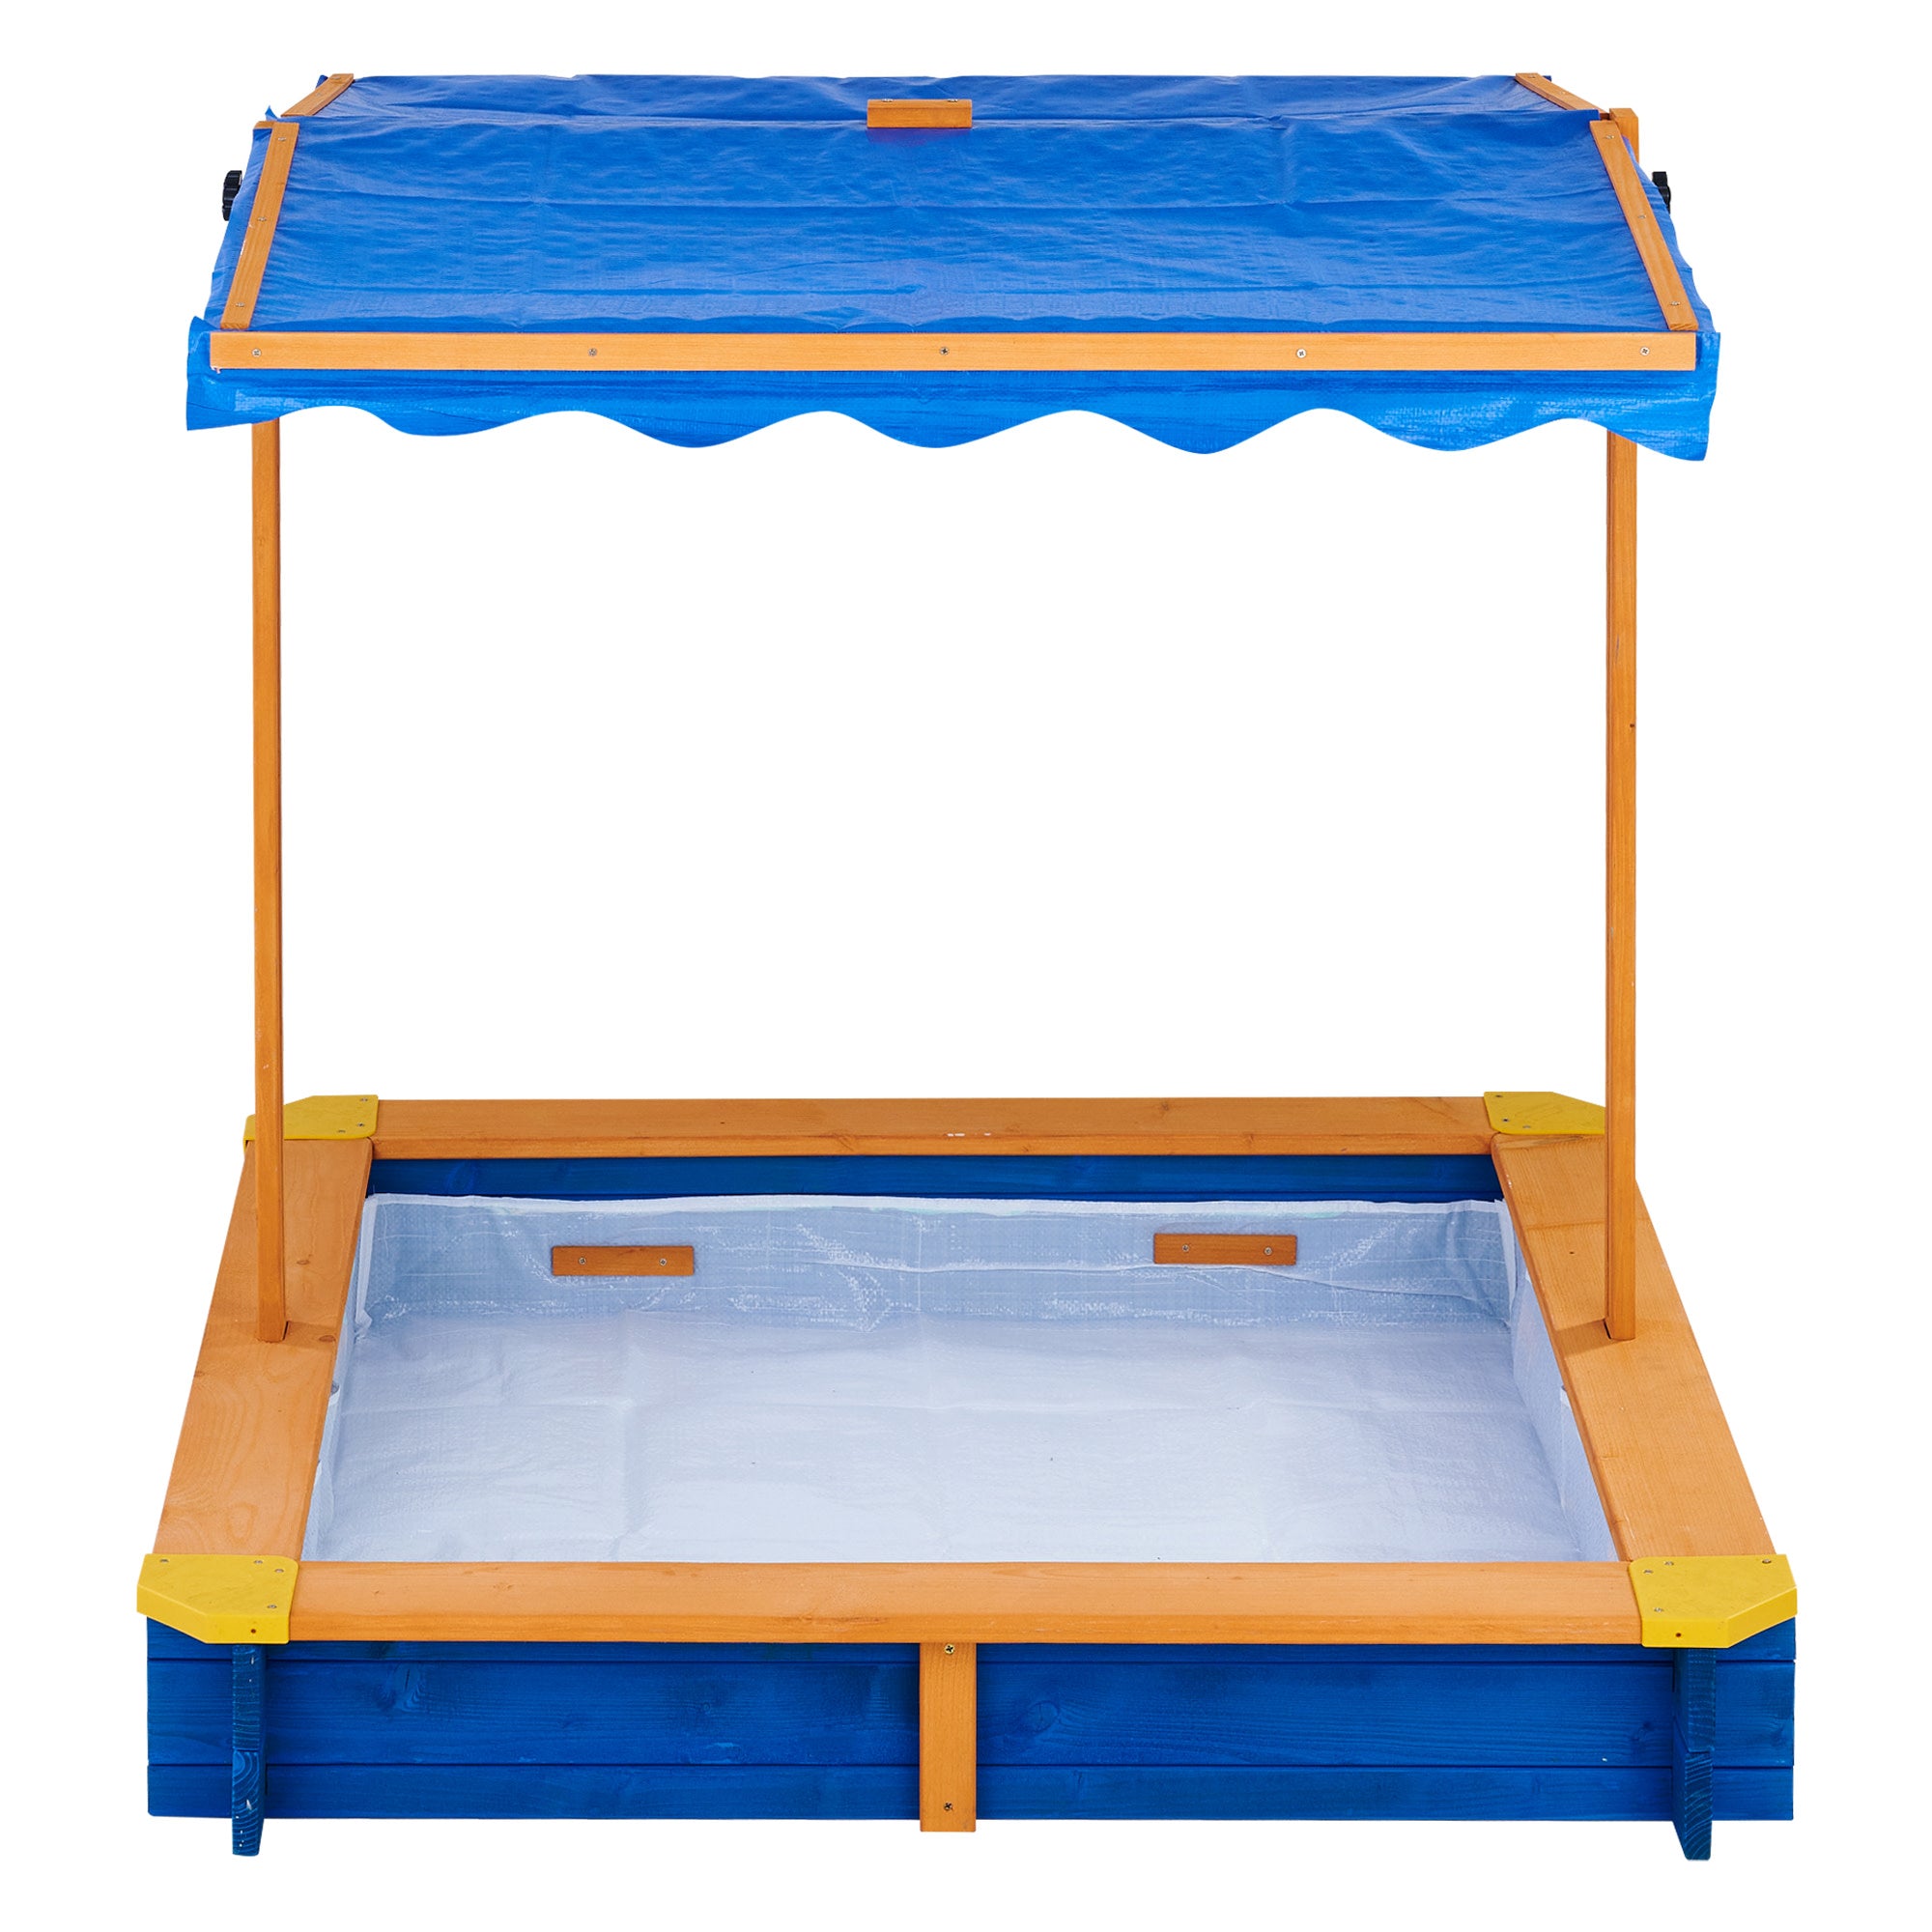 Teamson Kids 4' Square Solid Wood Sandbox with Rotatable Canopy Cover, Honey/Blue